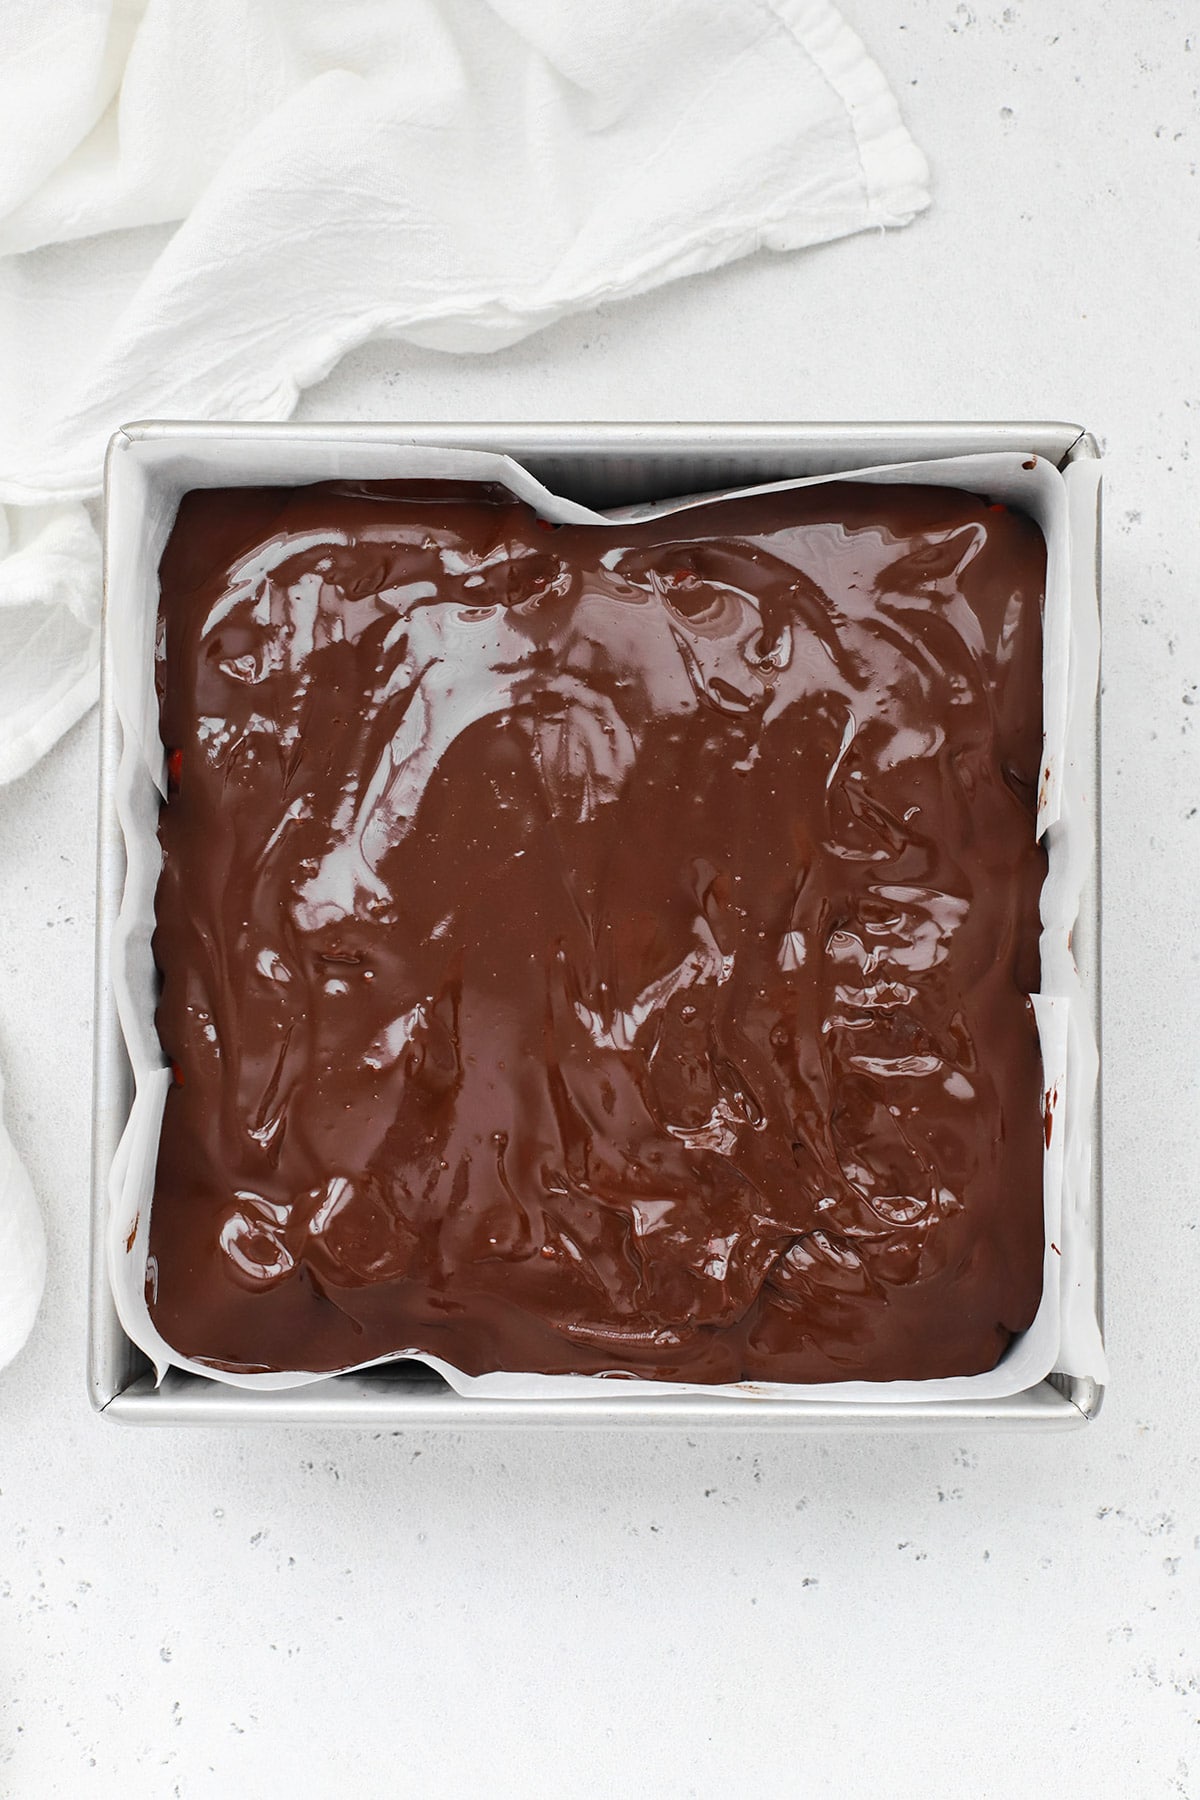 Overhead view of gluten-free chocolate covered strawberry brownies topped with ganache